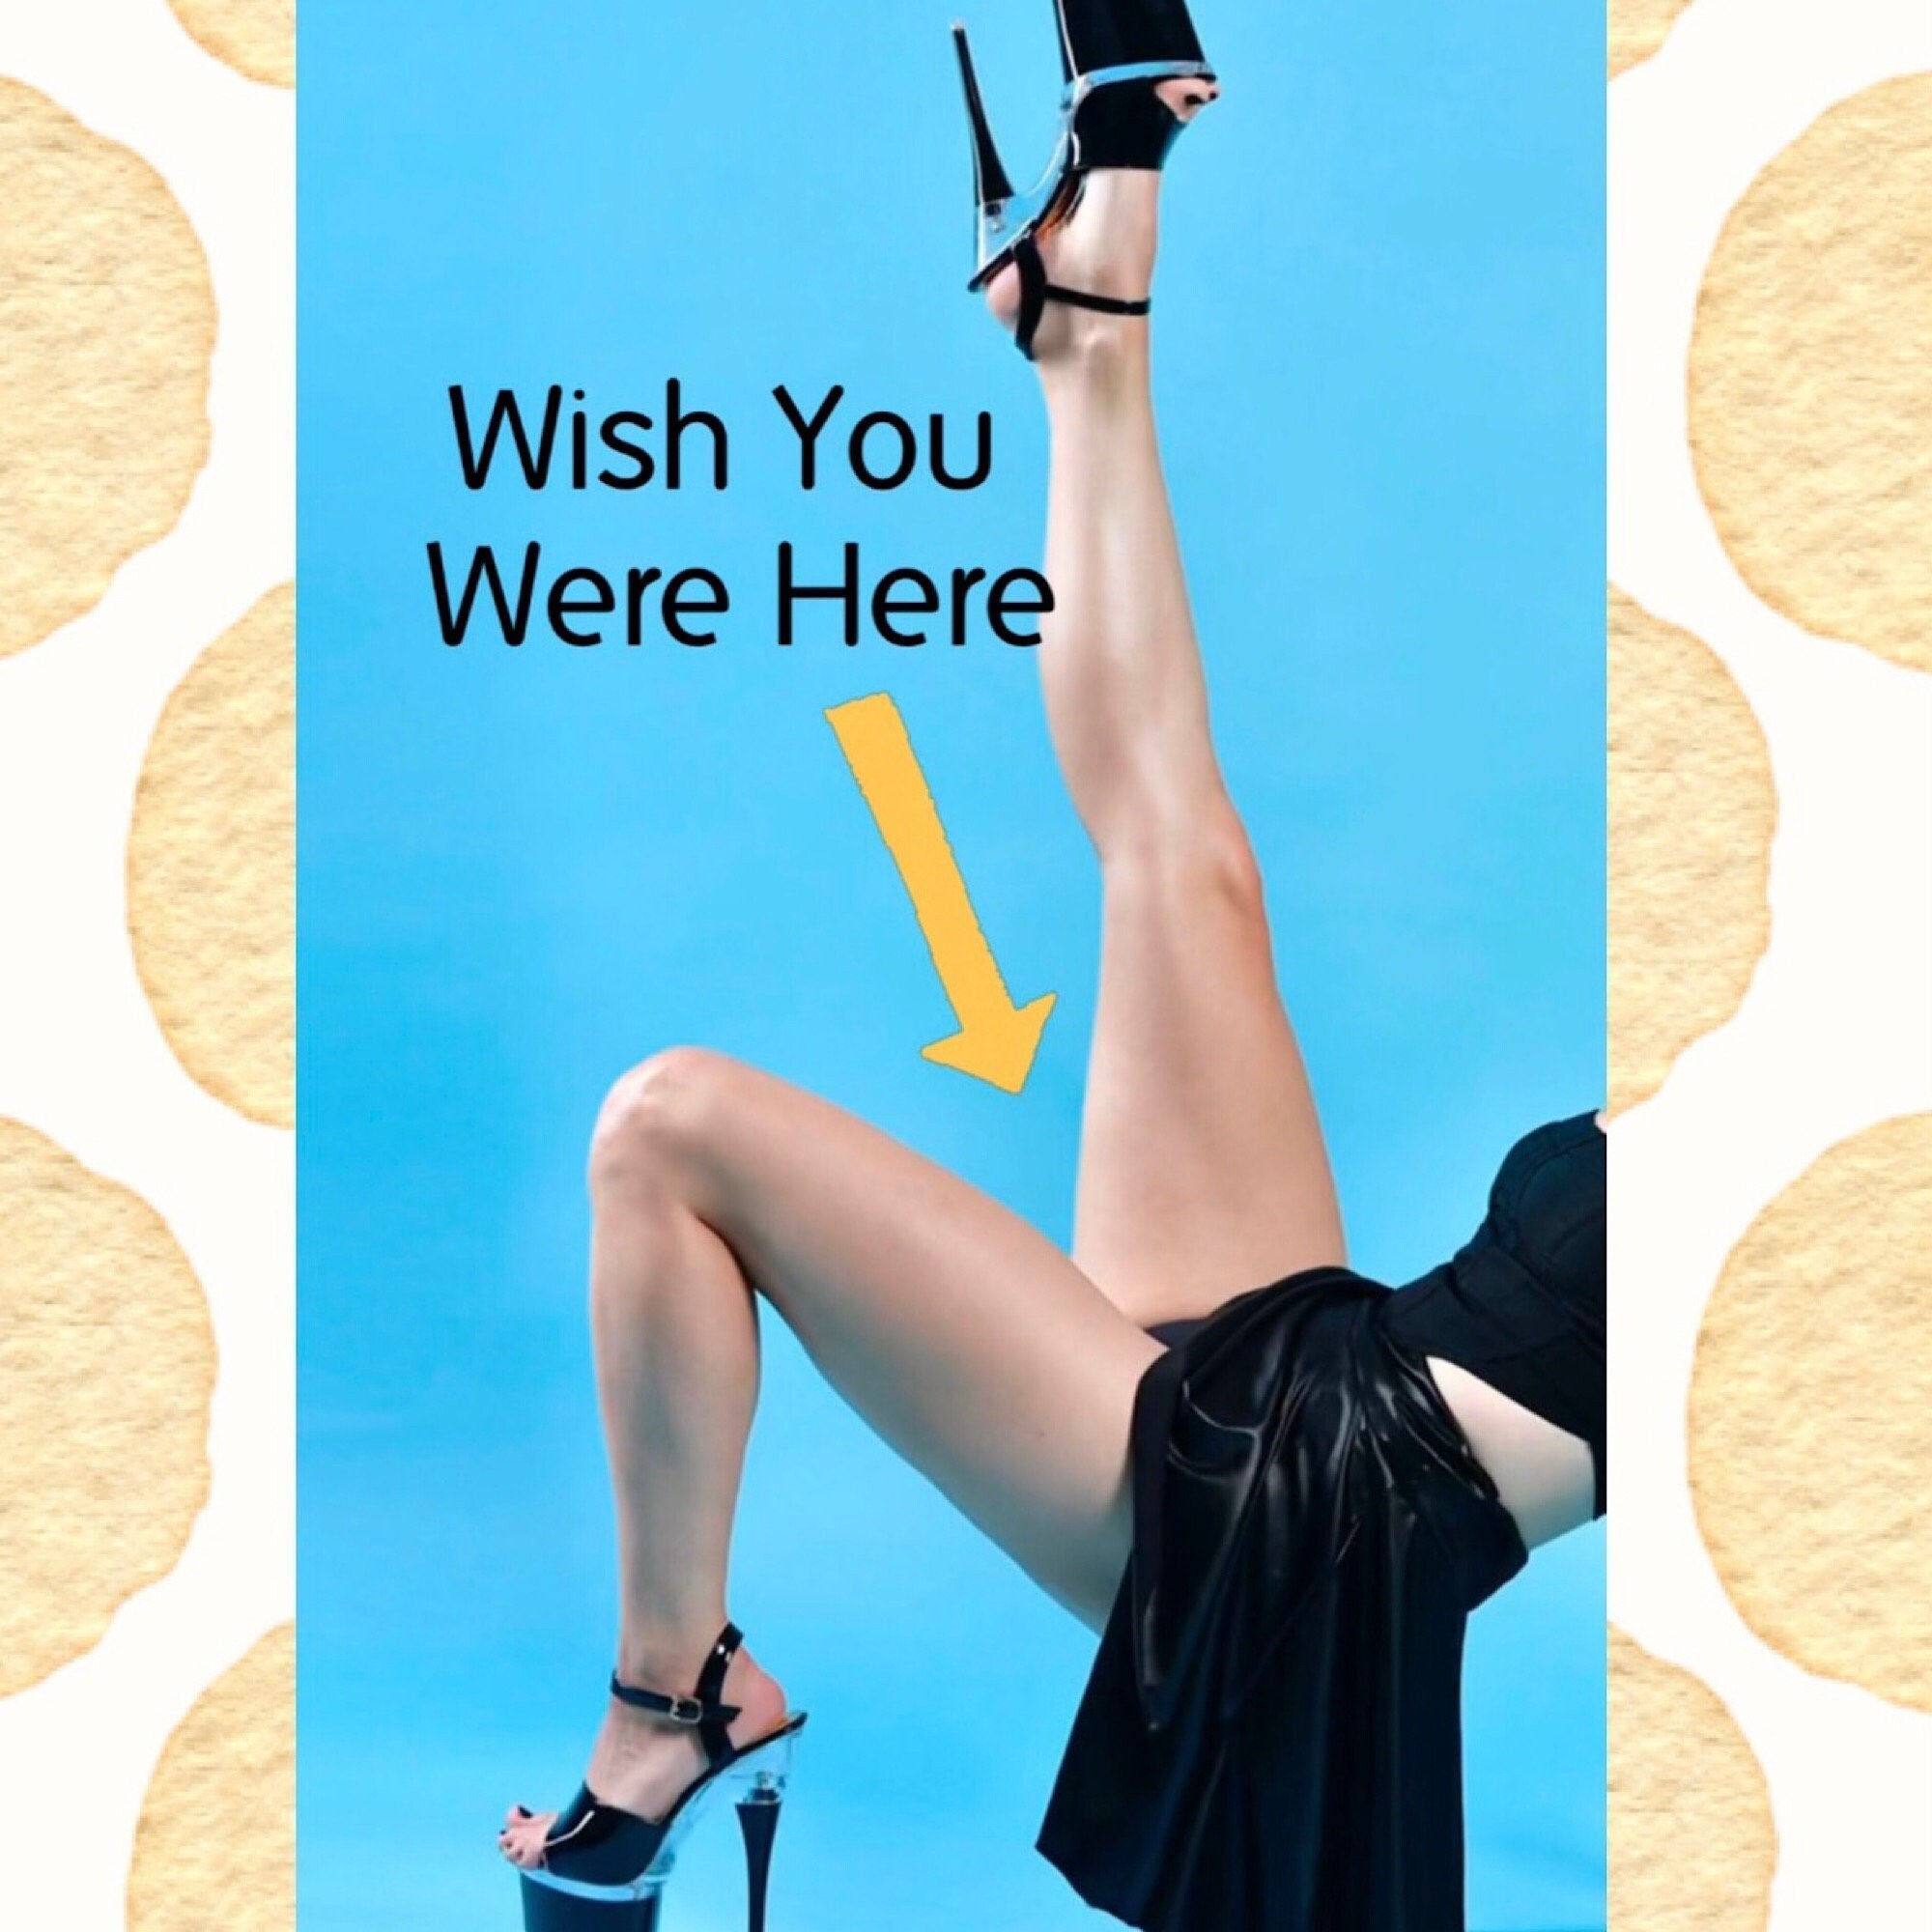 Wish You Were Here Funny Sexy Digital Adult Video Greeting - Etsy Denmark